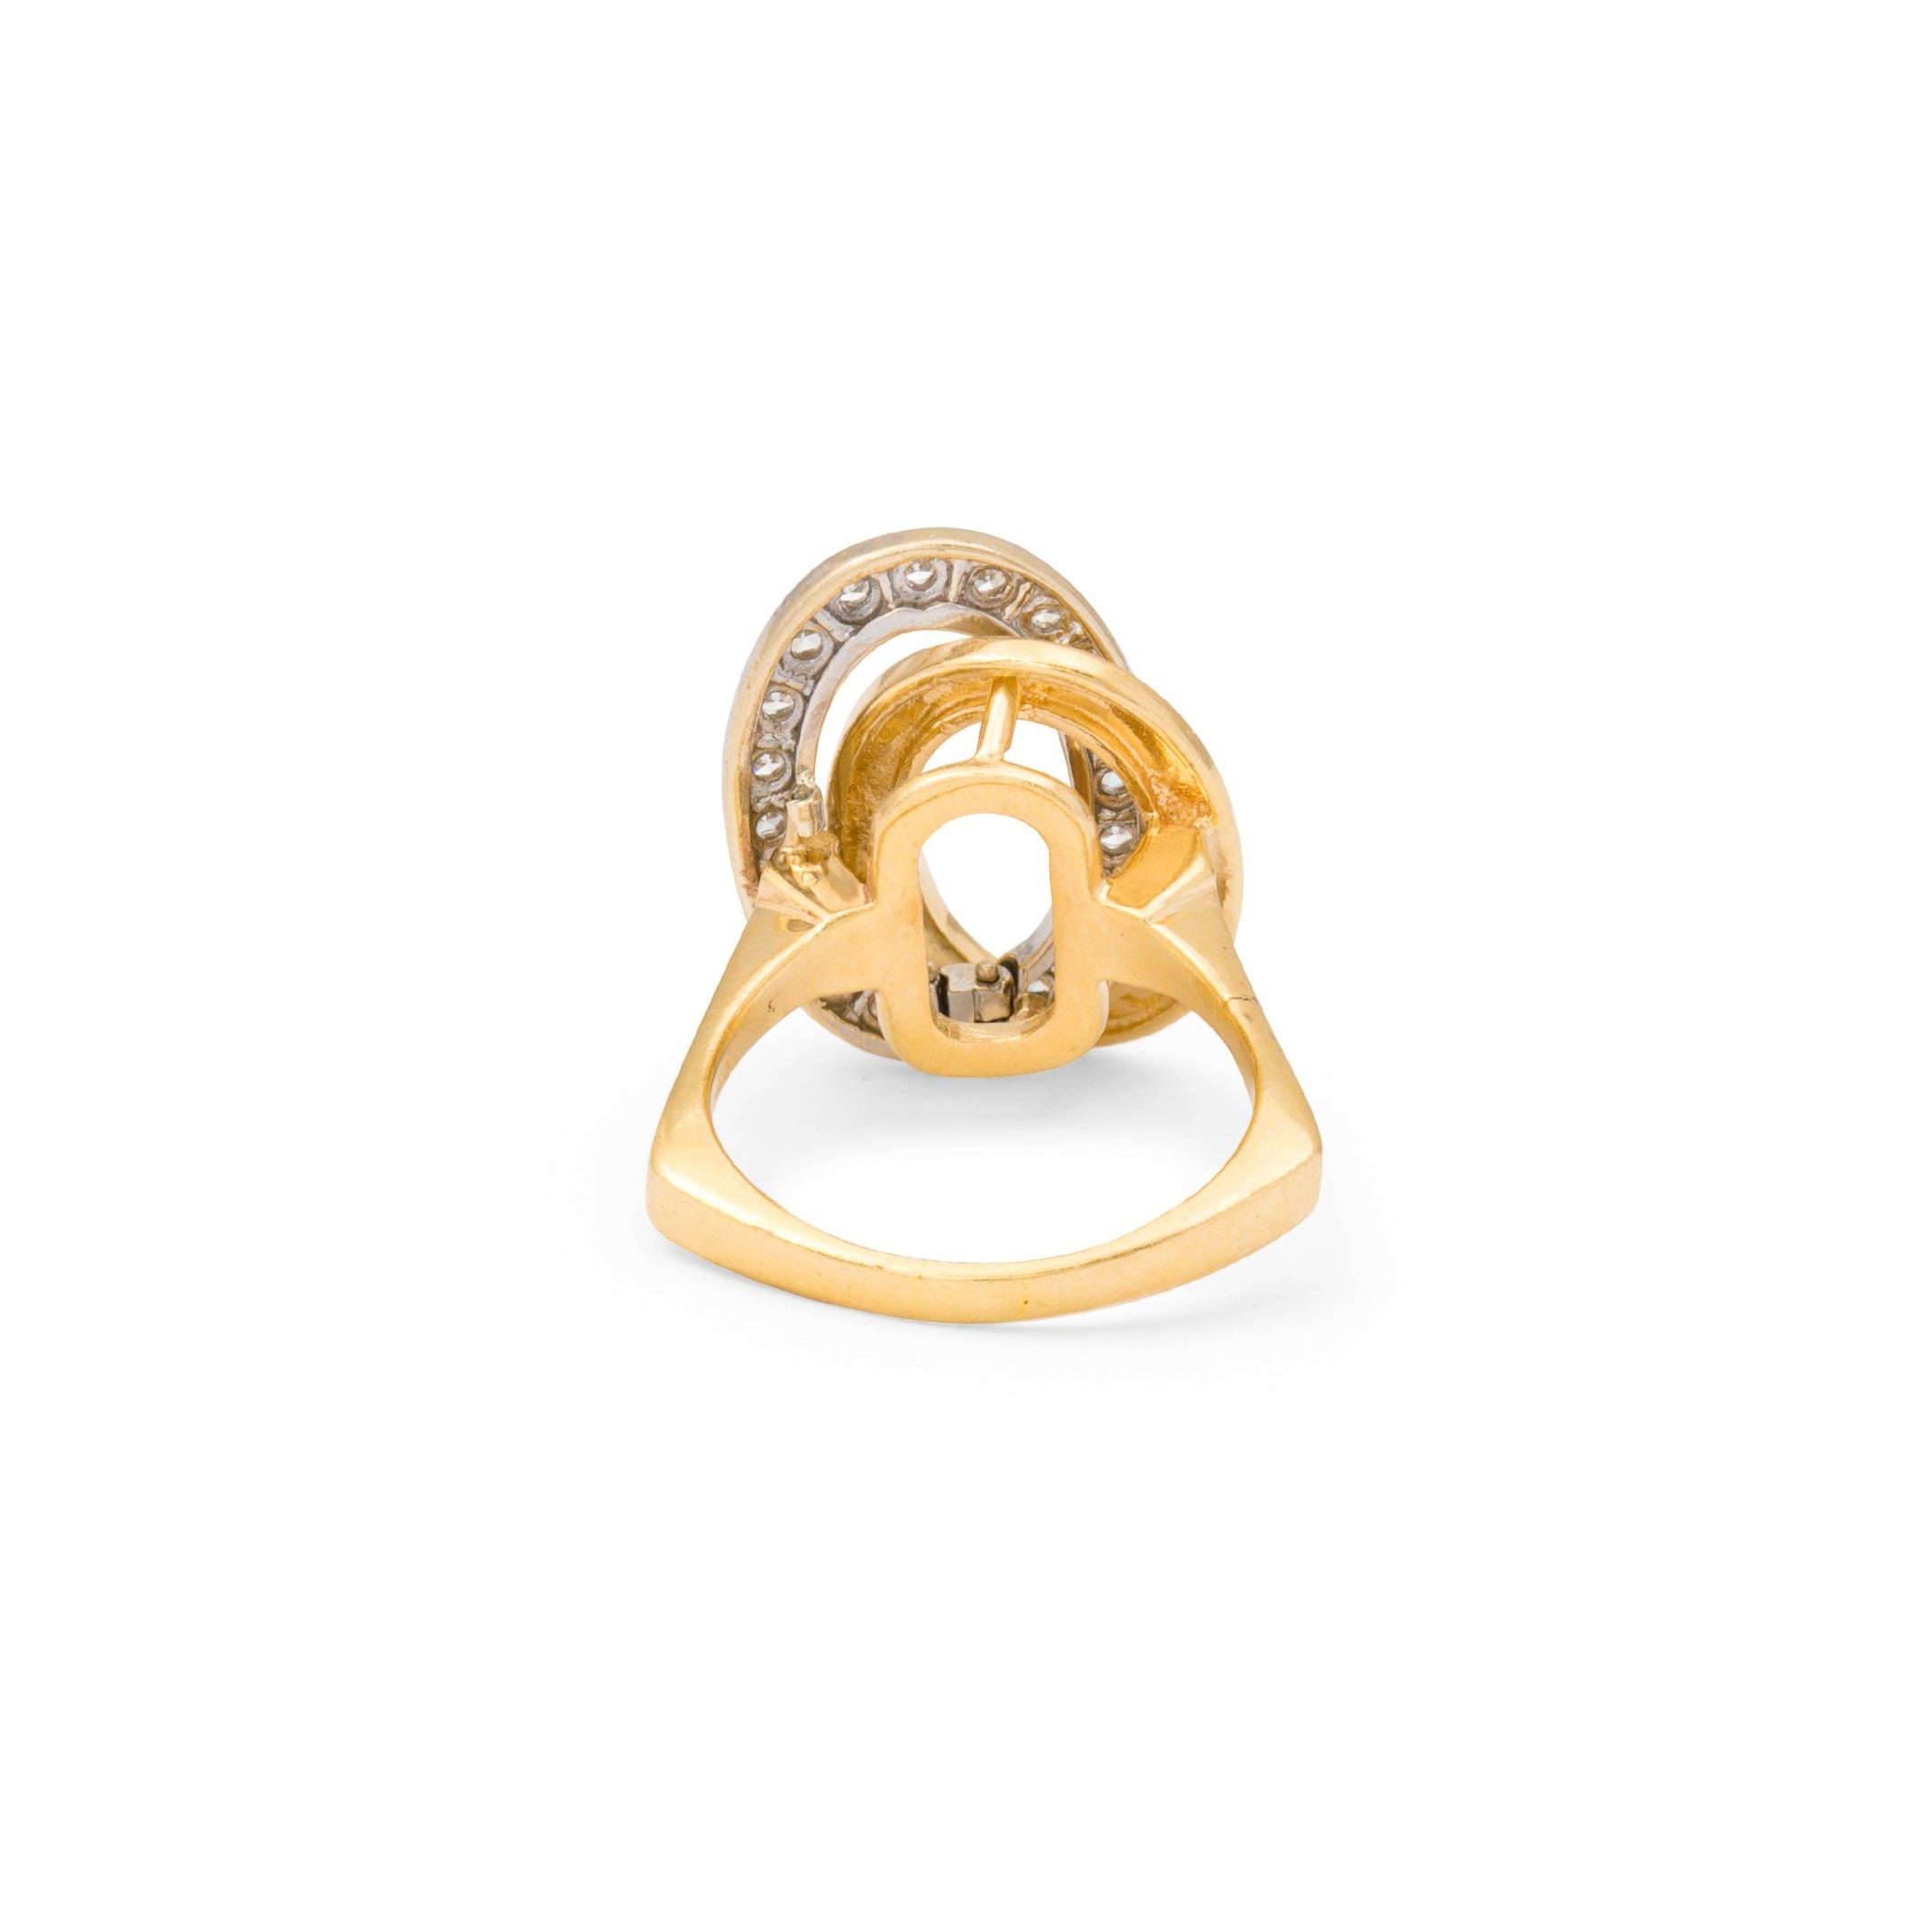 Double Oval 14K Bi-Color Gold and Diamond Ring